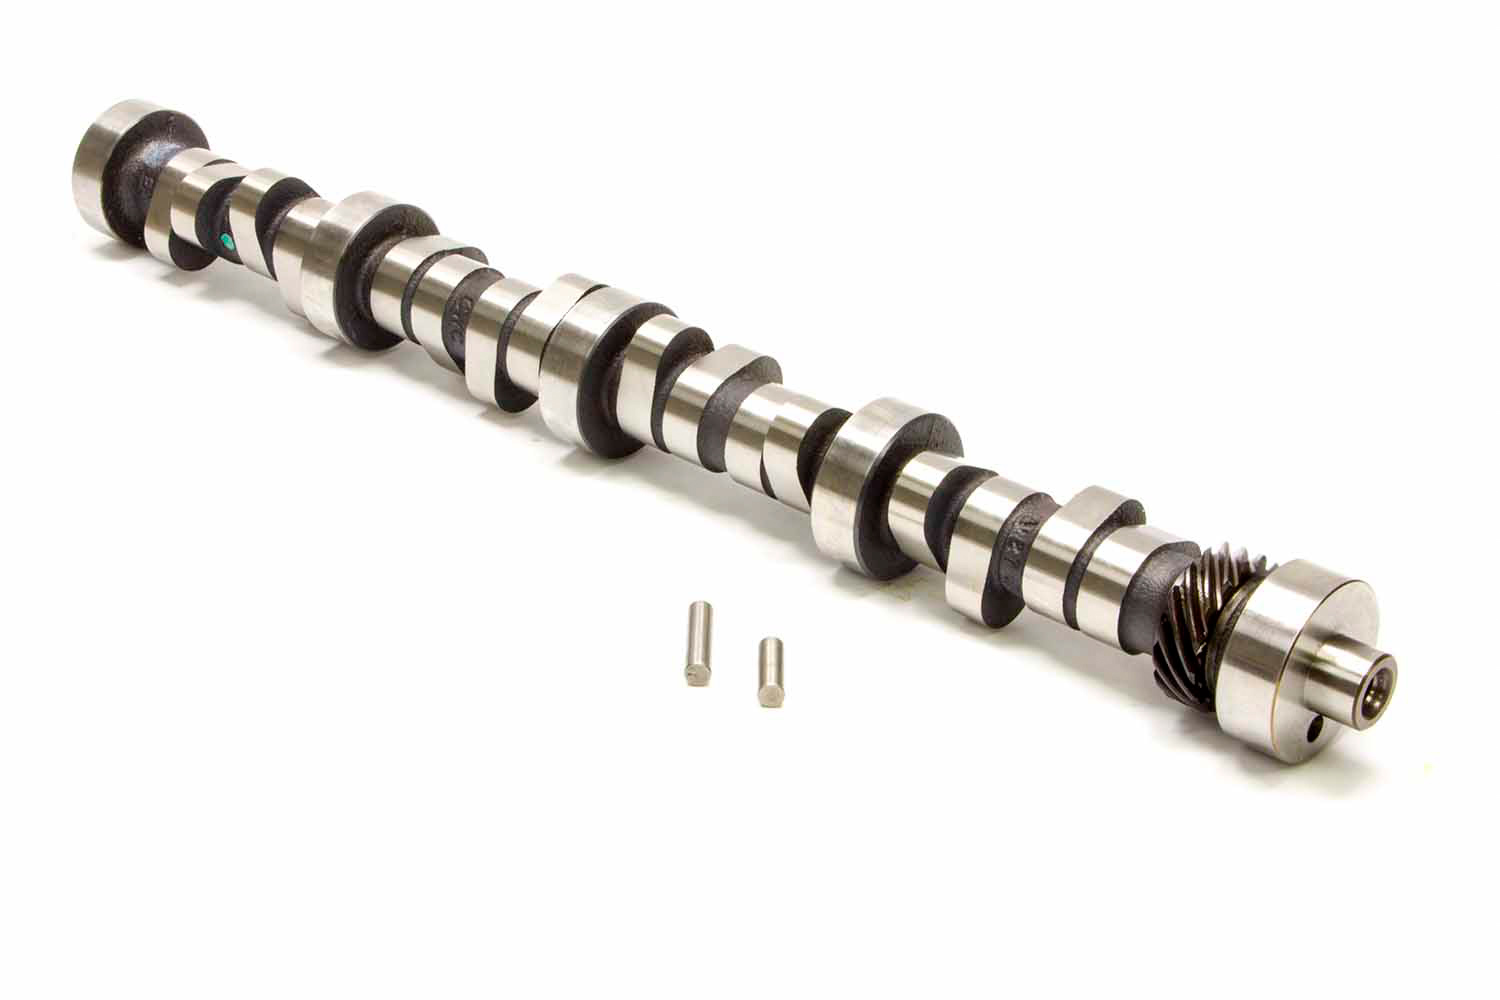 Lunati Cams 20350712 Camshaft, Voodoo, Hydraulic Roller, Lift 0.571 / 0.587 in, Duration 289 / 290, 110 LSA, 2600 / 6600 RPM, Small Block Ford, Each